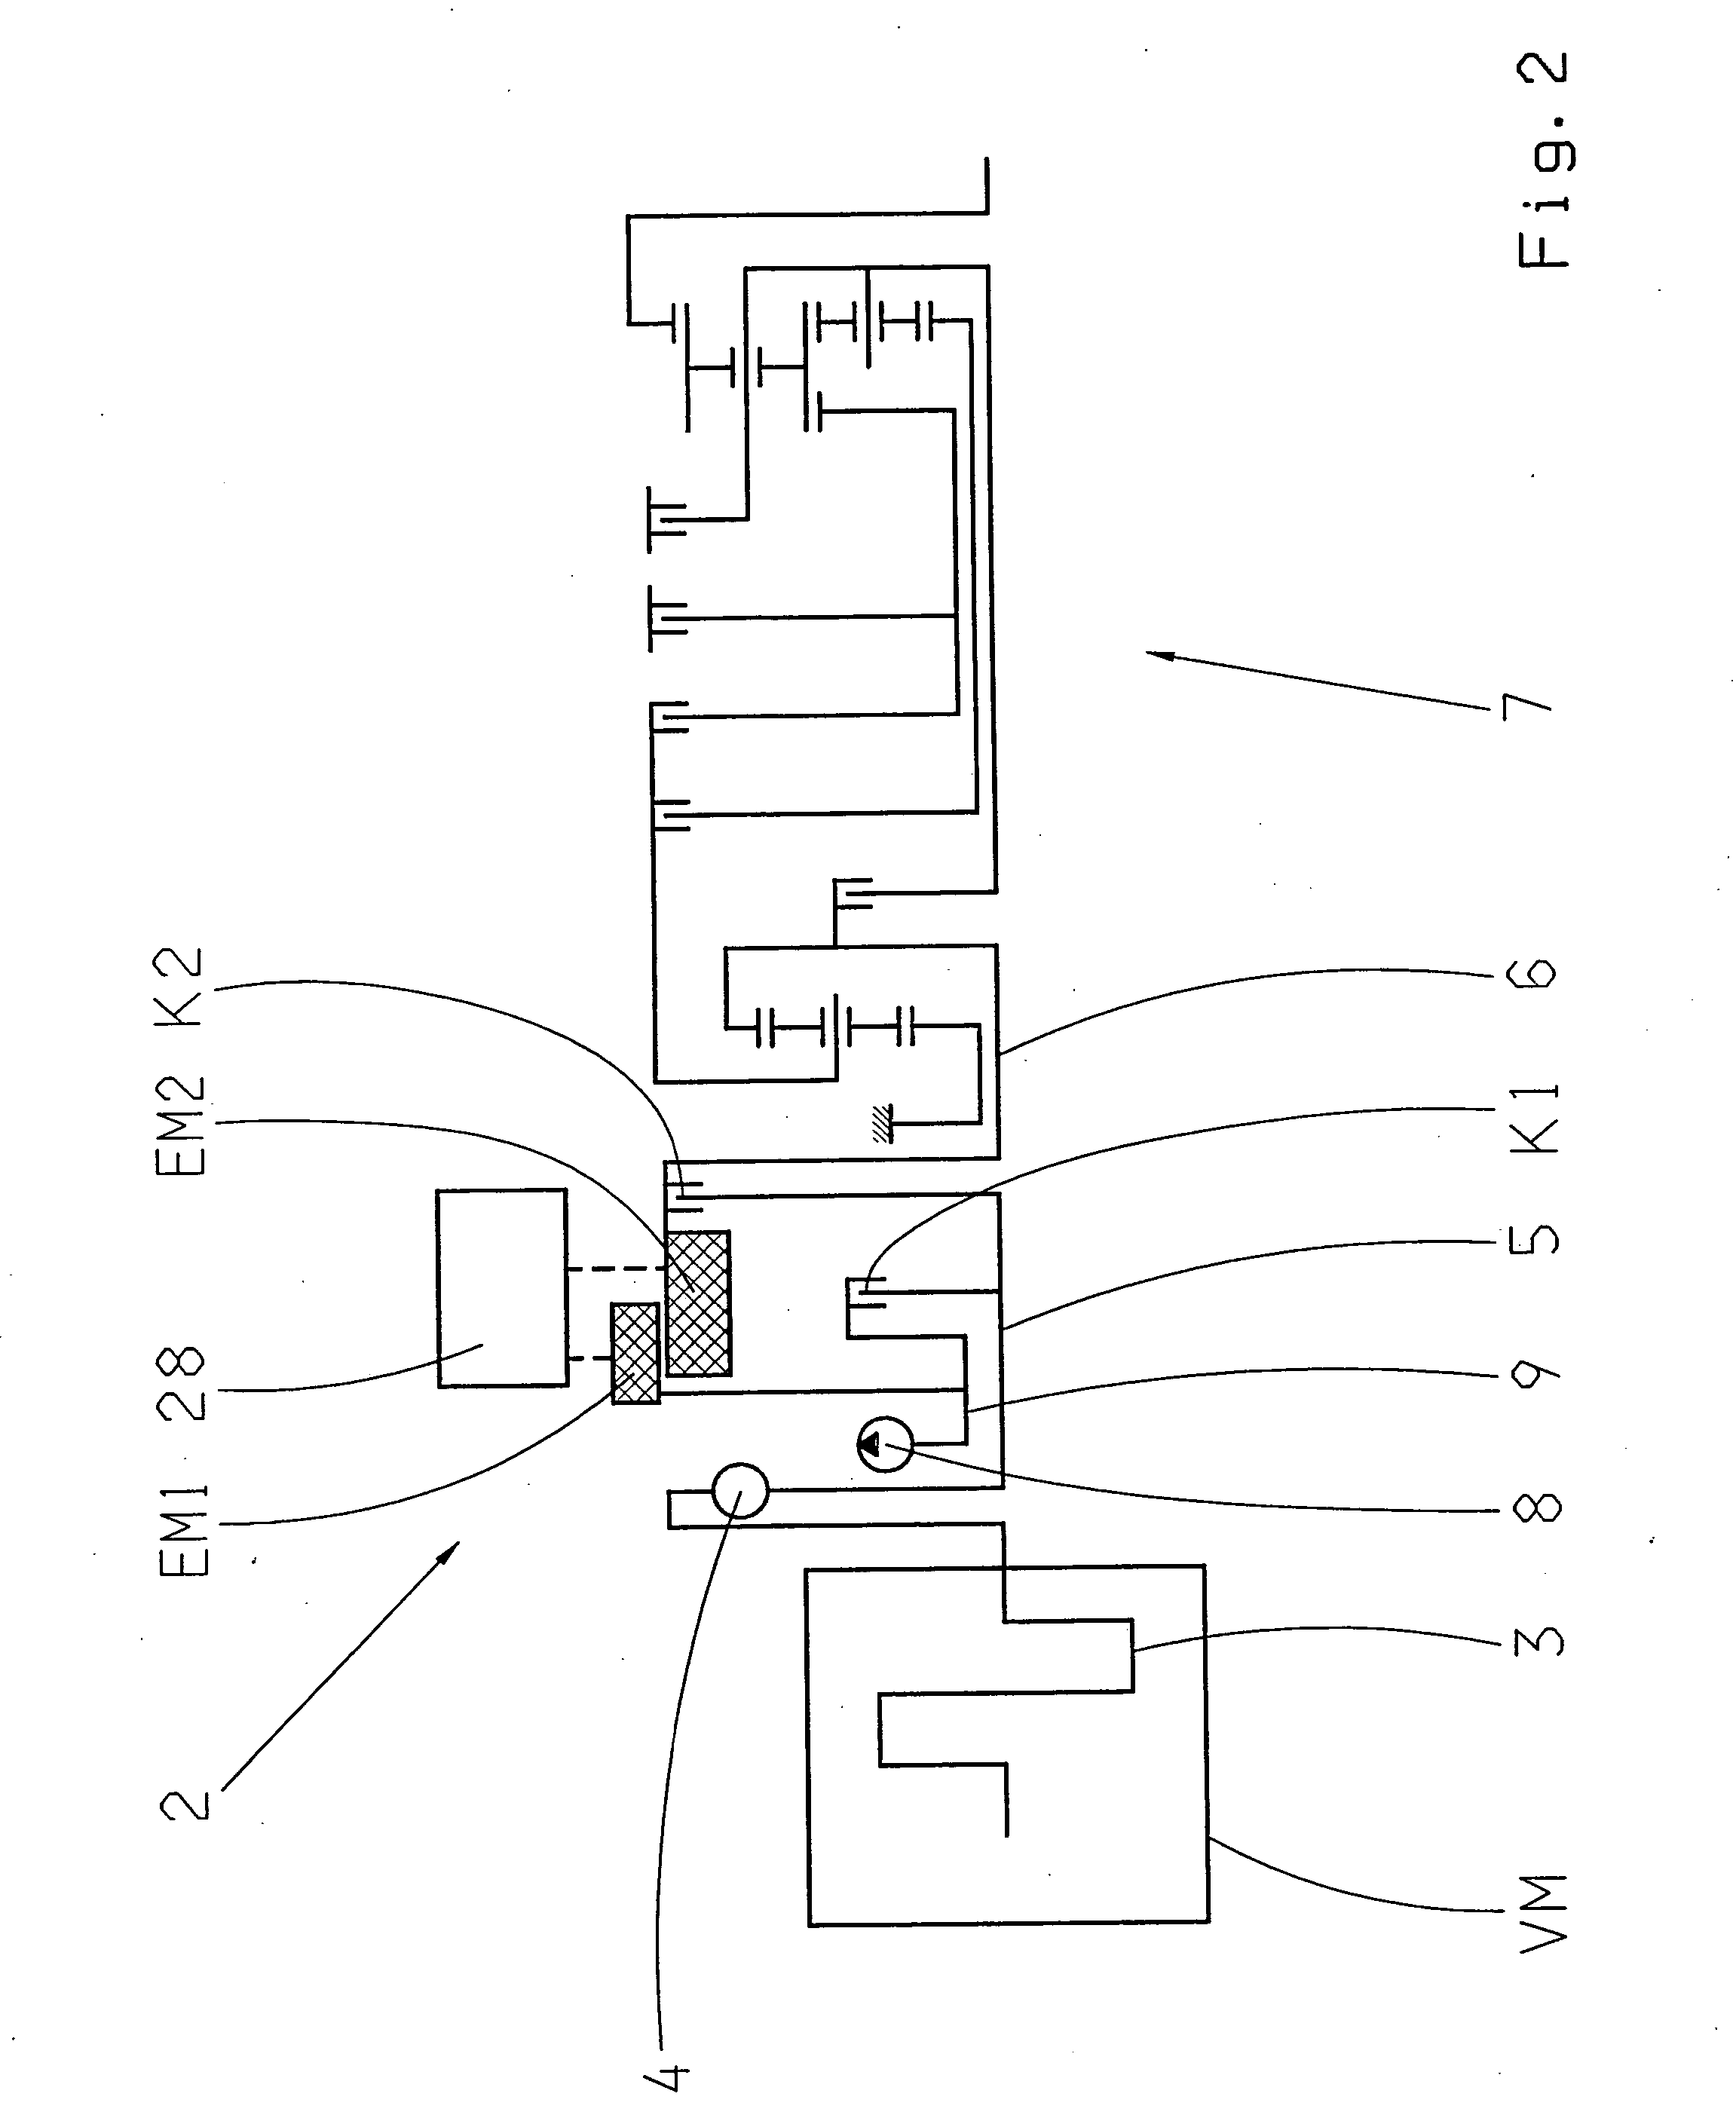 Device and method for determination of the drive-power distribution in a hybrid driveline of a vehicle